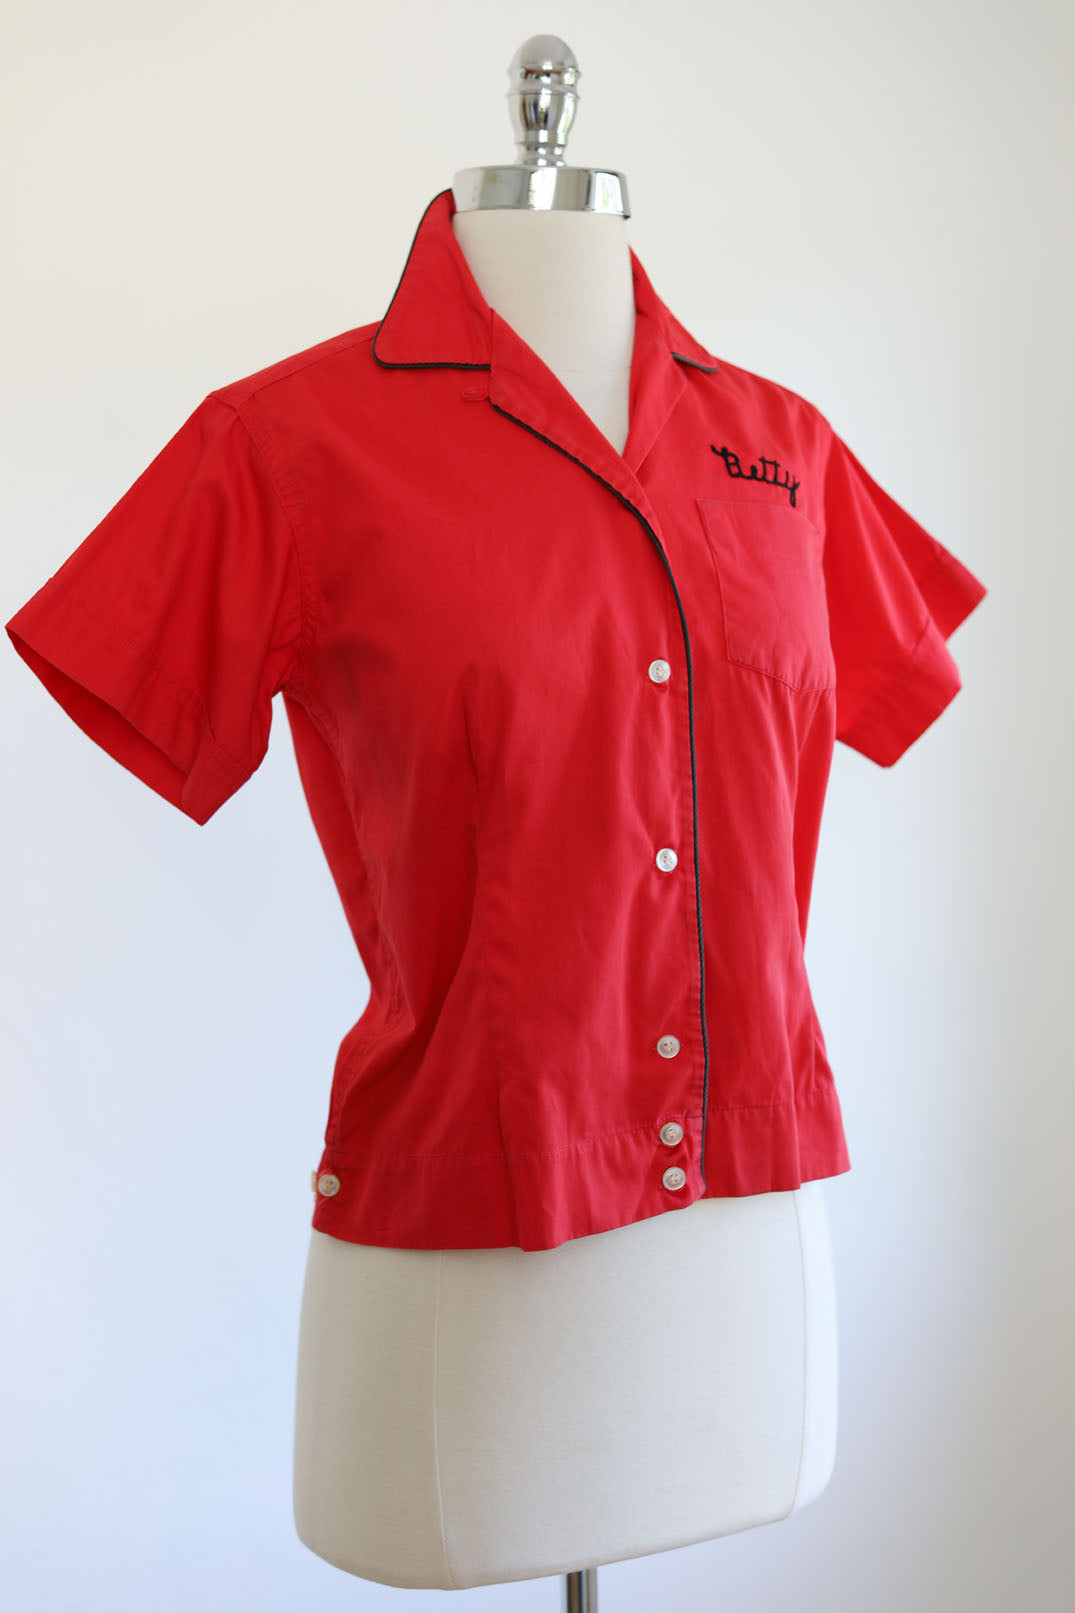 Vintage 1950s Bowling Shirt - BETTY of the HAMPTONS! Scarlet Red Cotton w Black Chainstitching Women's Top Size XS - M